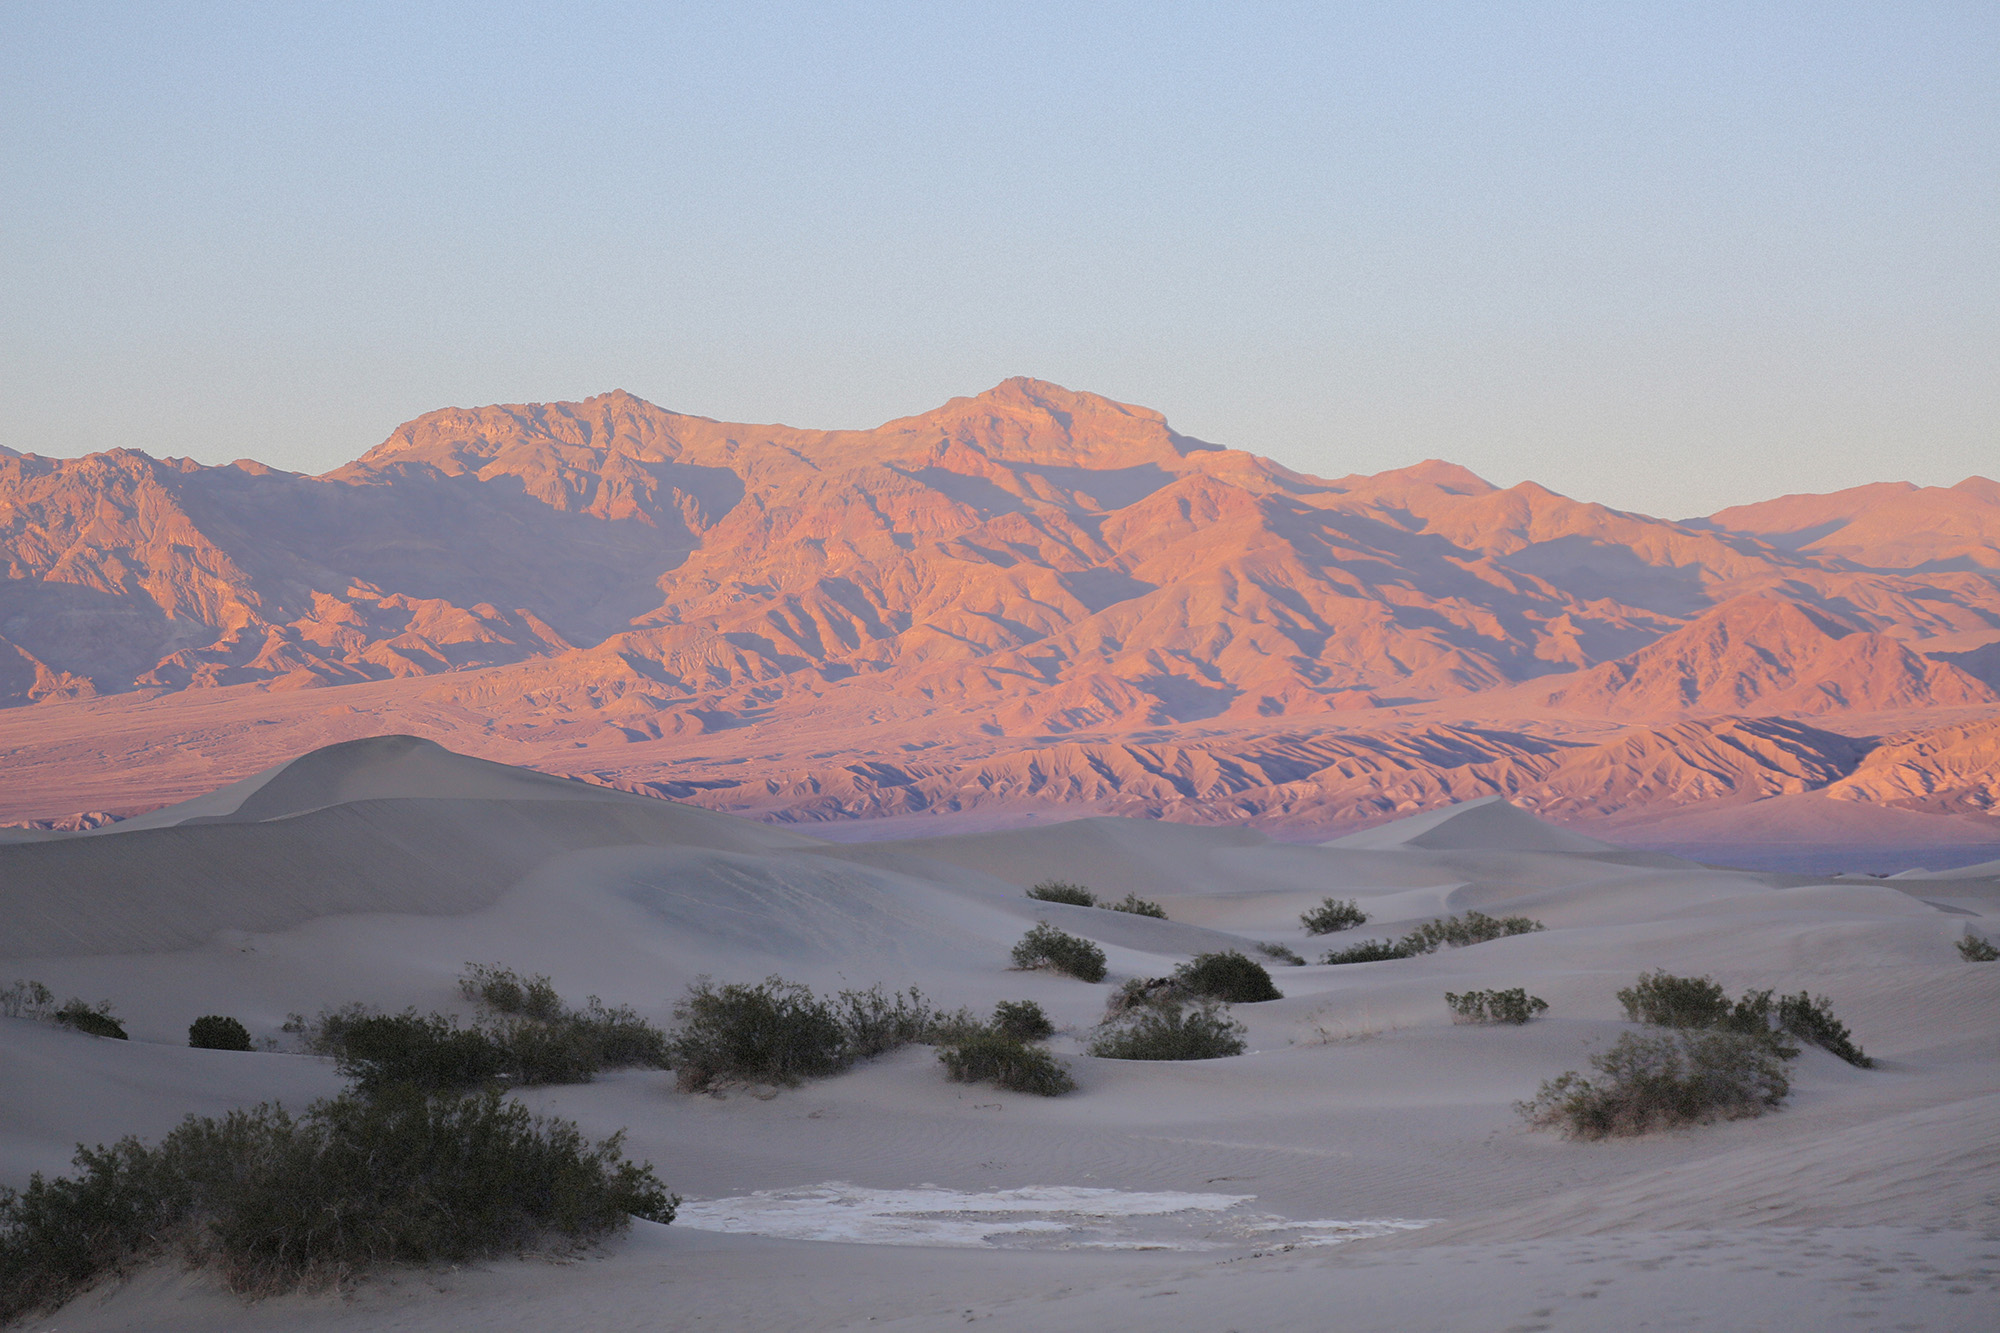 Sunrise glow on the mountains viewed from the Mesquite Flat Sand Dunes in Death Valley National Park, California.